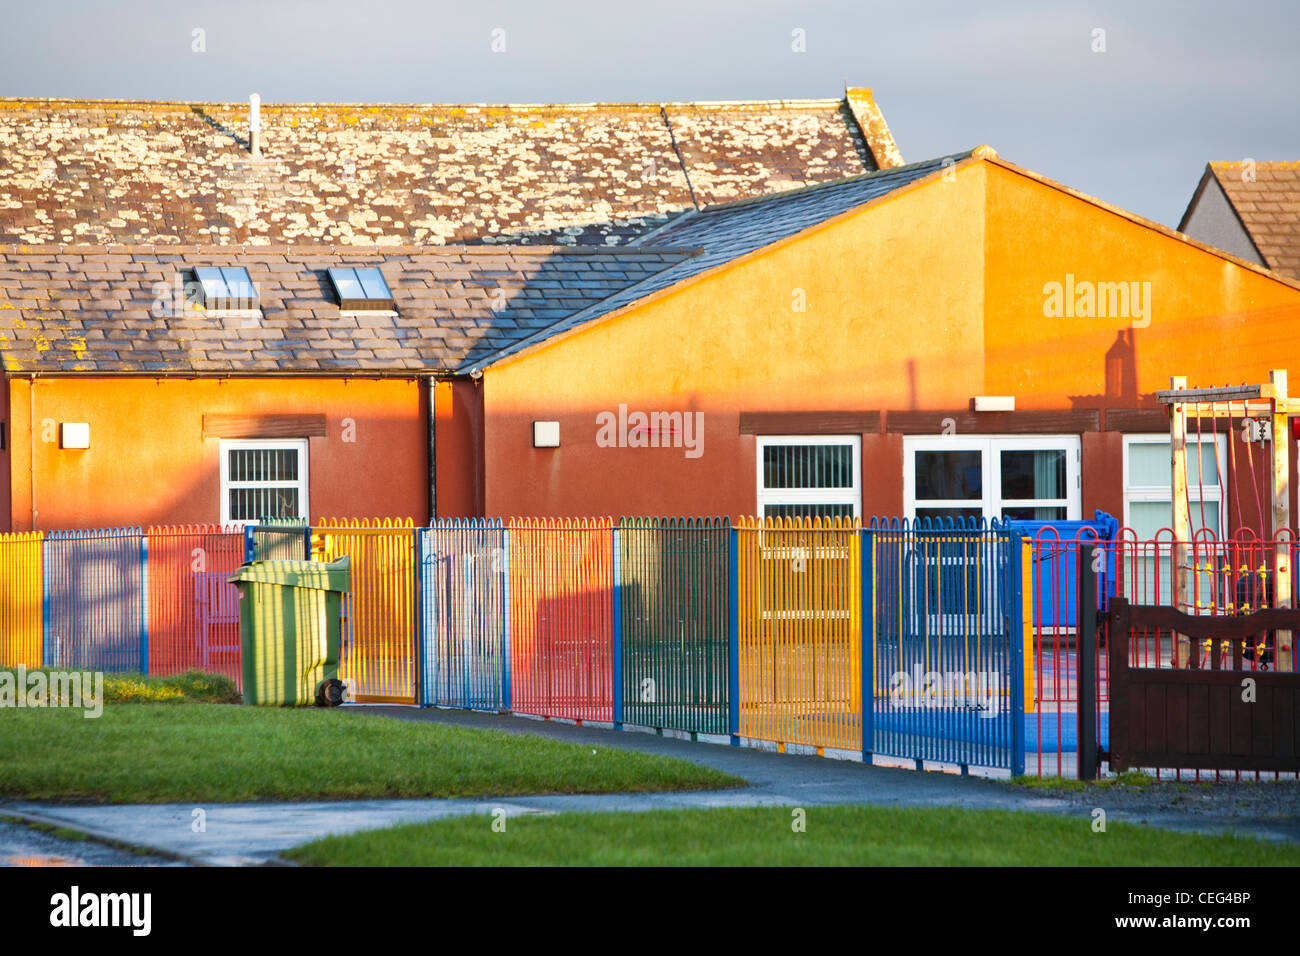 A school in Allonby on the Solway Coast, Cumbria, UK in warm evening light at sunset. Stock Photo